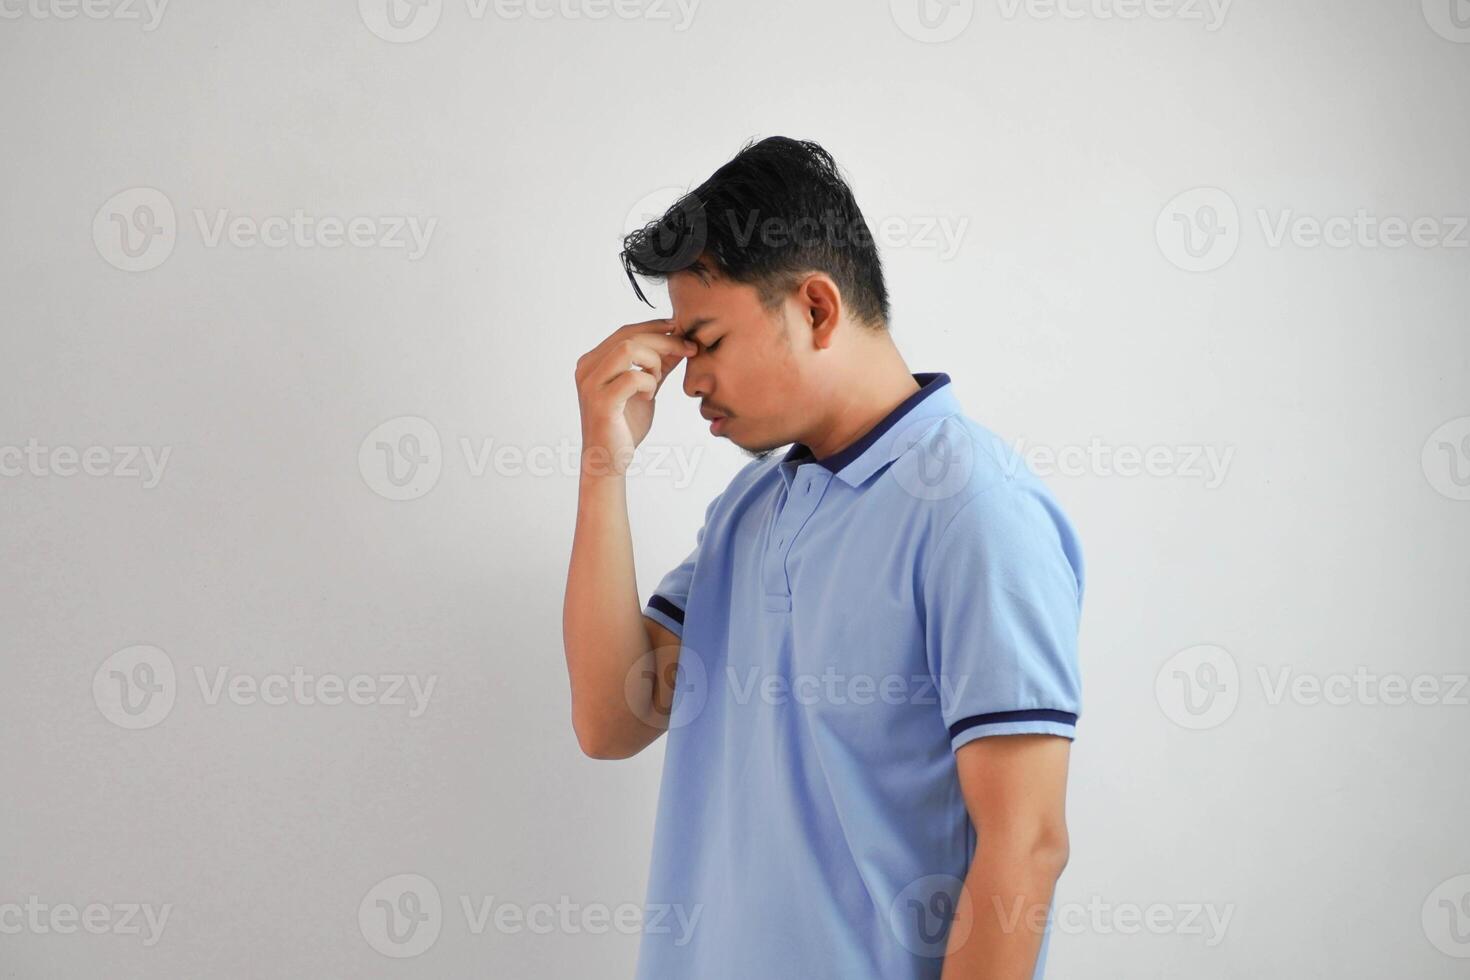 dizziness or depression portrait young asian man holding nose wearing blue polo t shirt isolated on white background photo